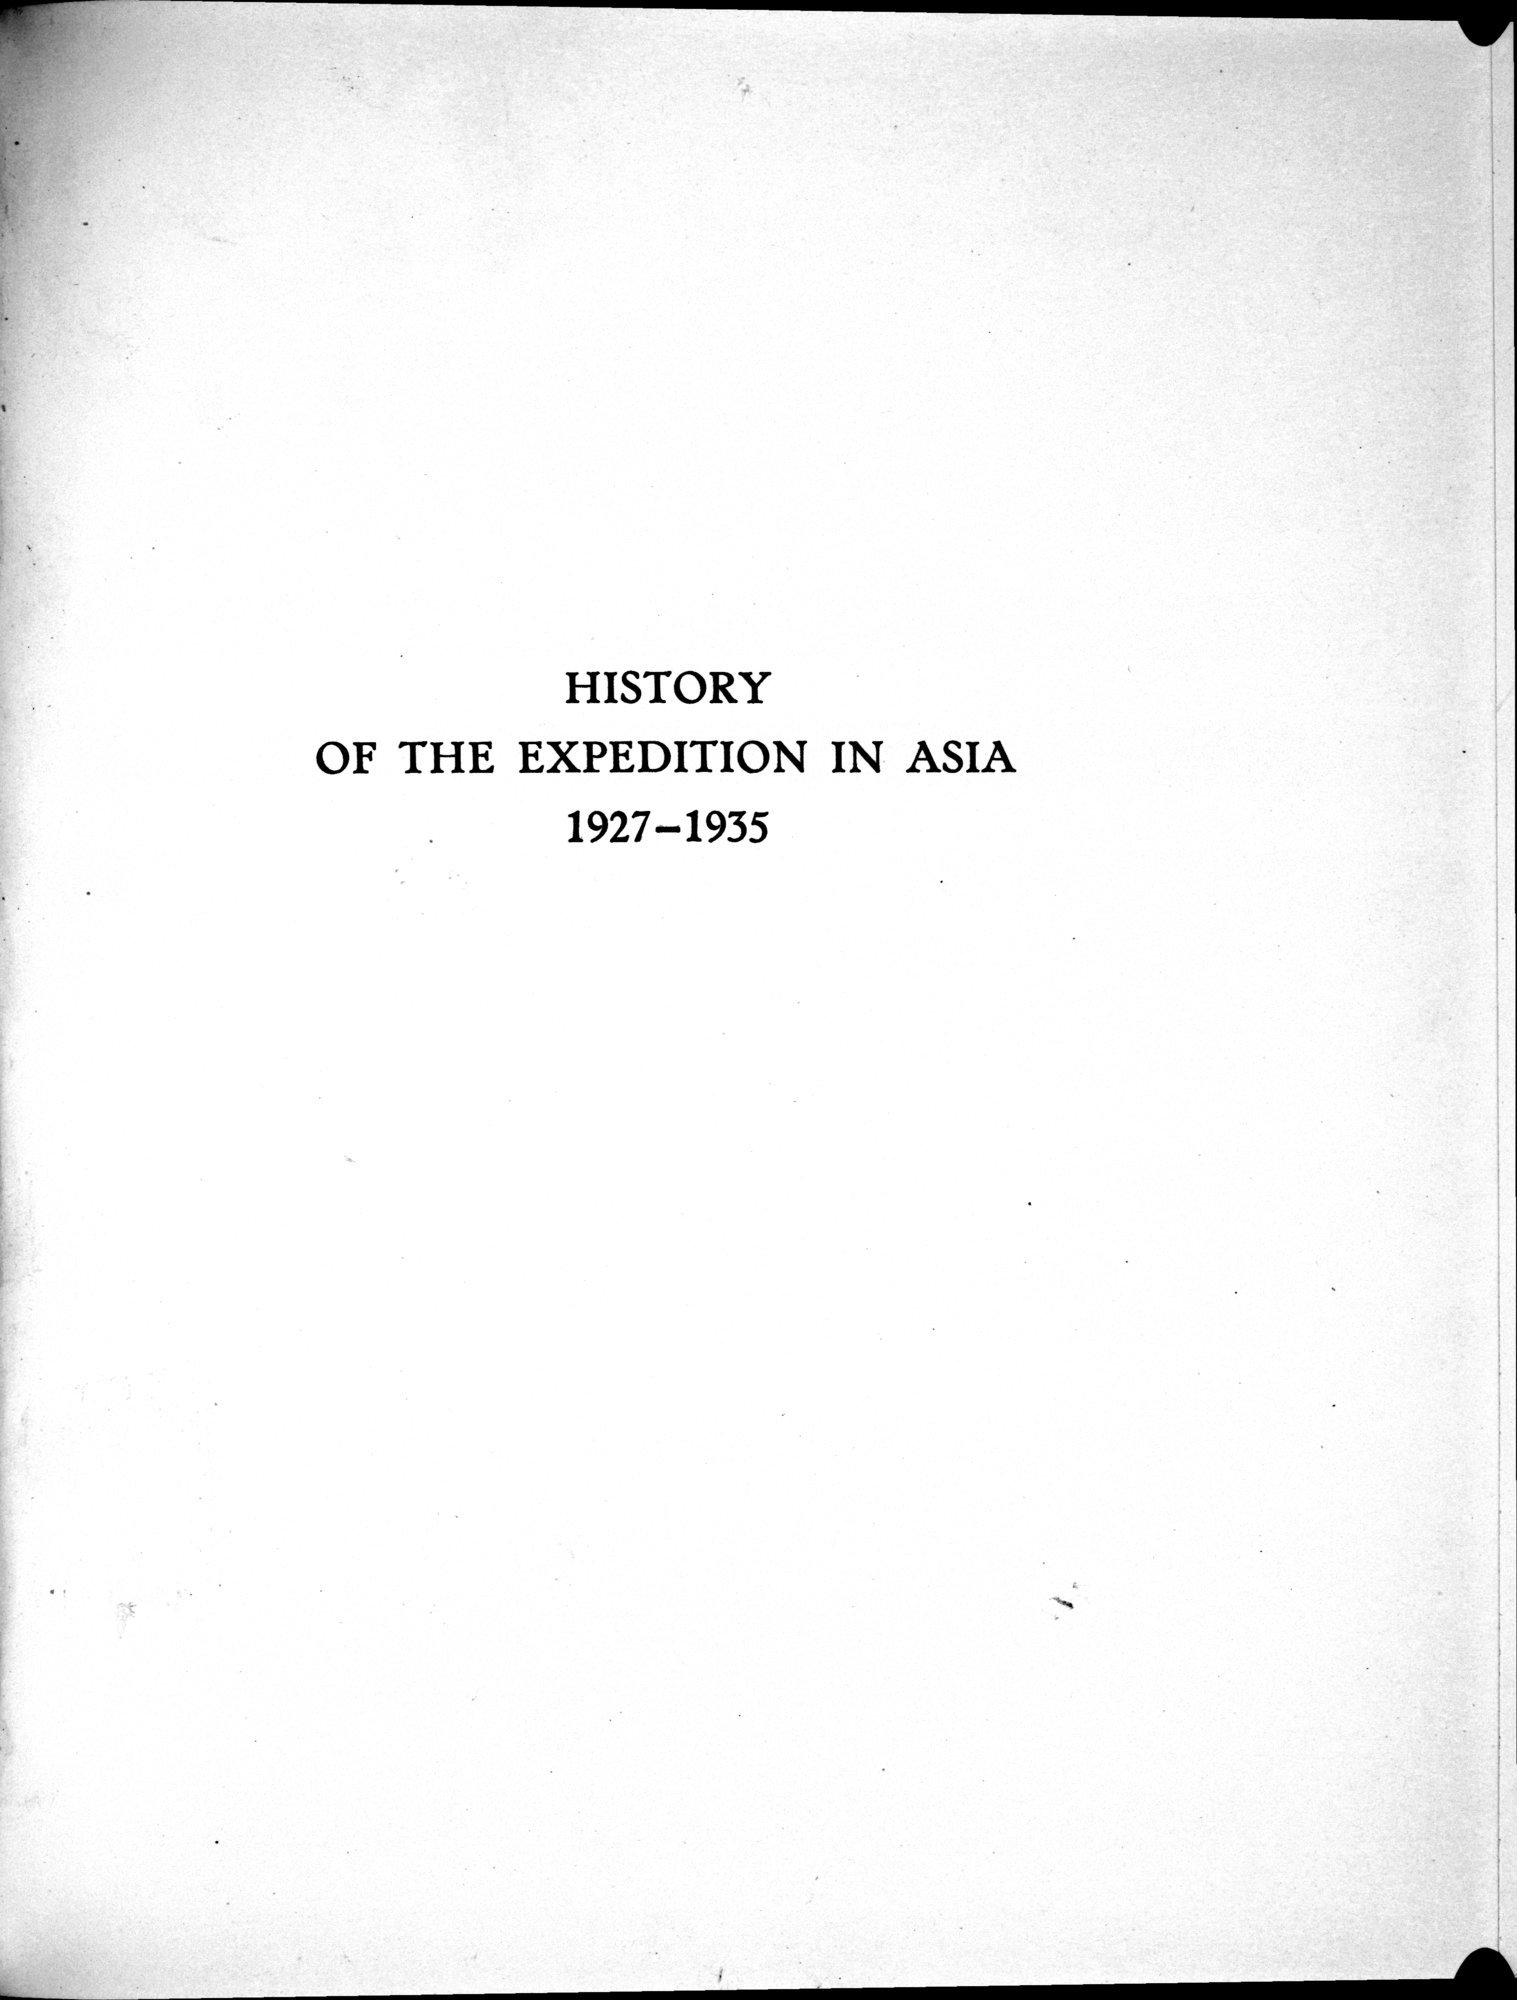 History of the Expedition in Asia, 1927-1935 : vol.2 / Page 7 (Grayscale High Resolution Image)